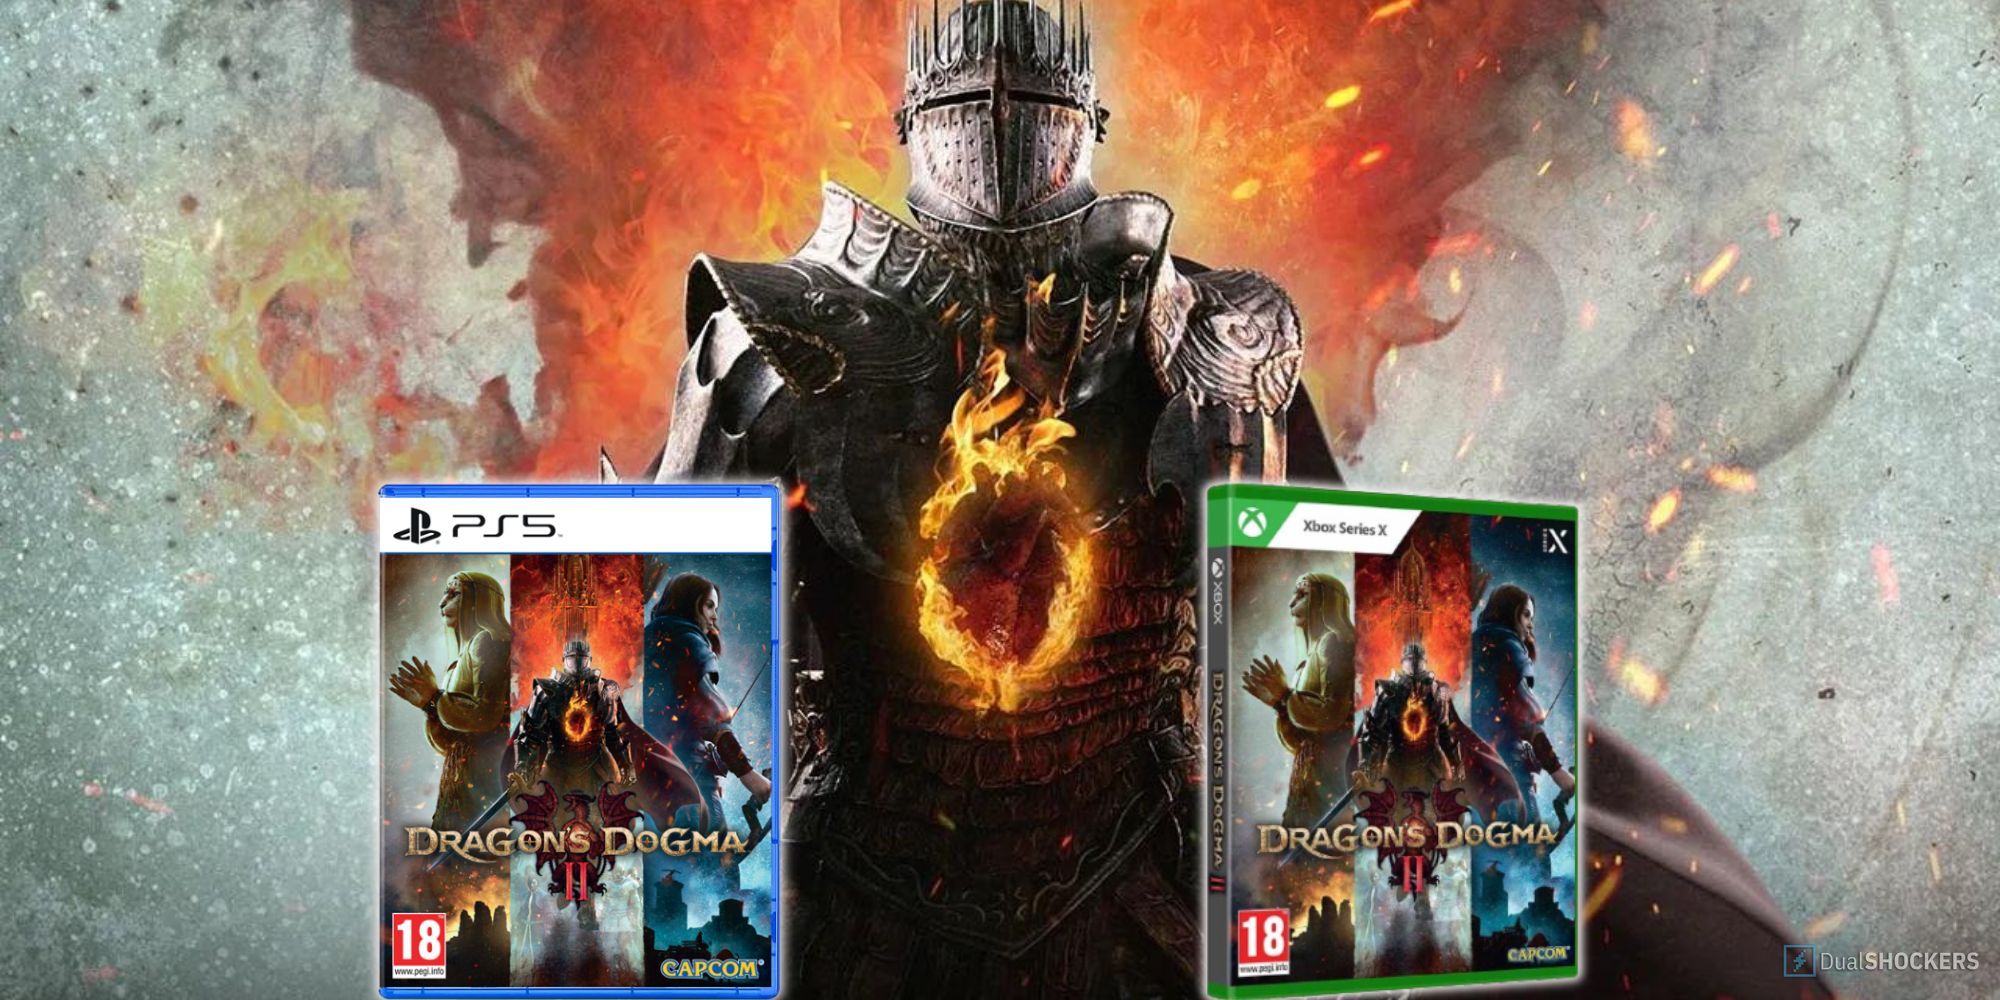 Feature image with Dragon's Dogma 2 knight in the background and the PS5 and Xbox covers on either side.